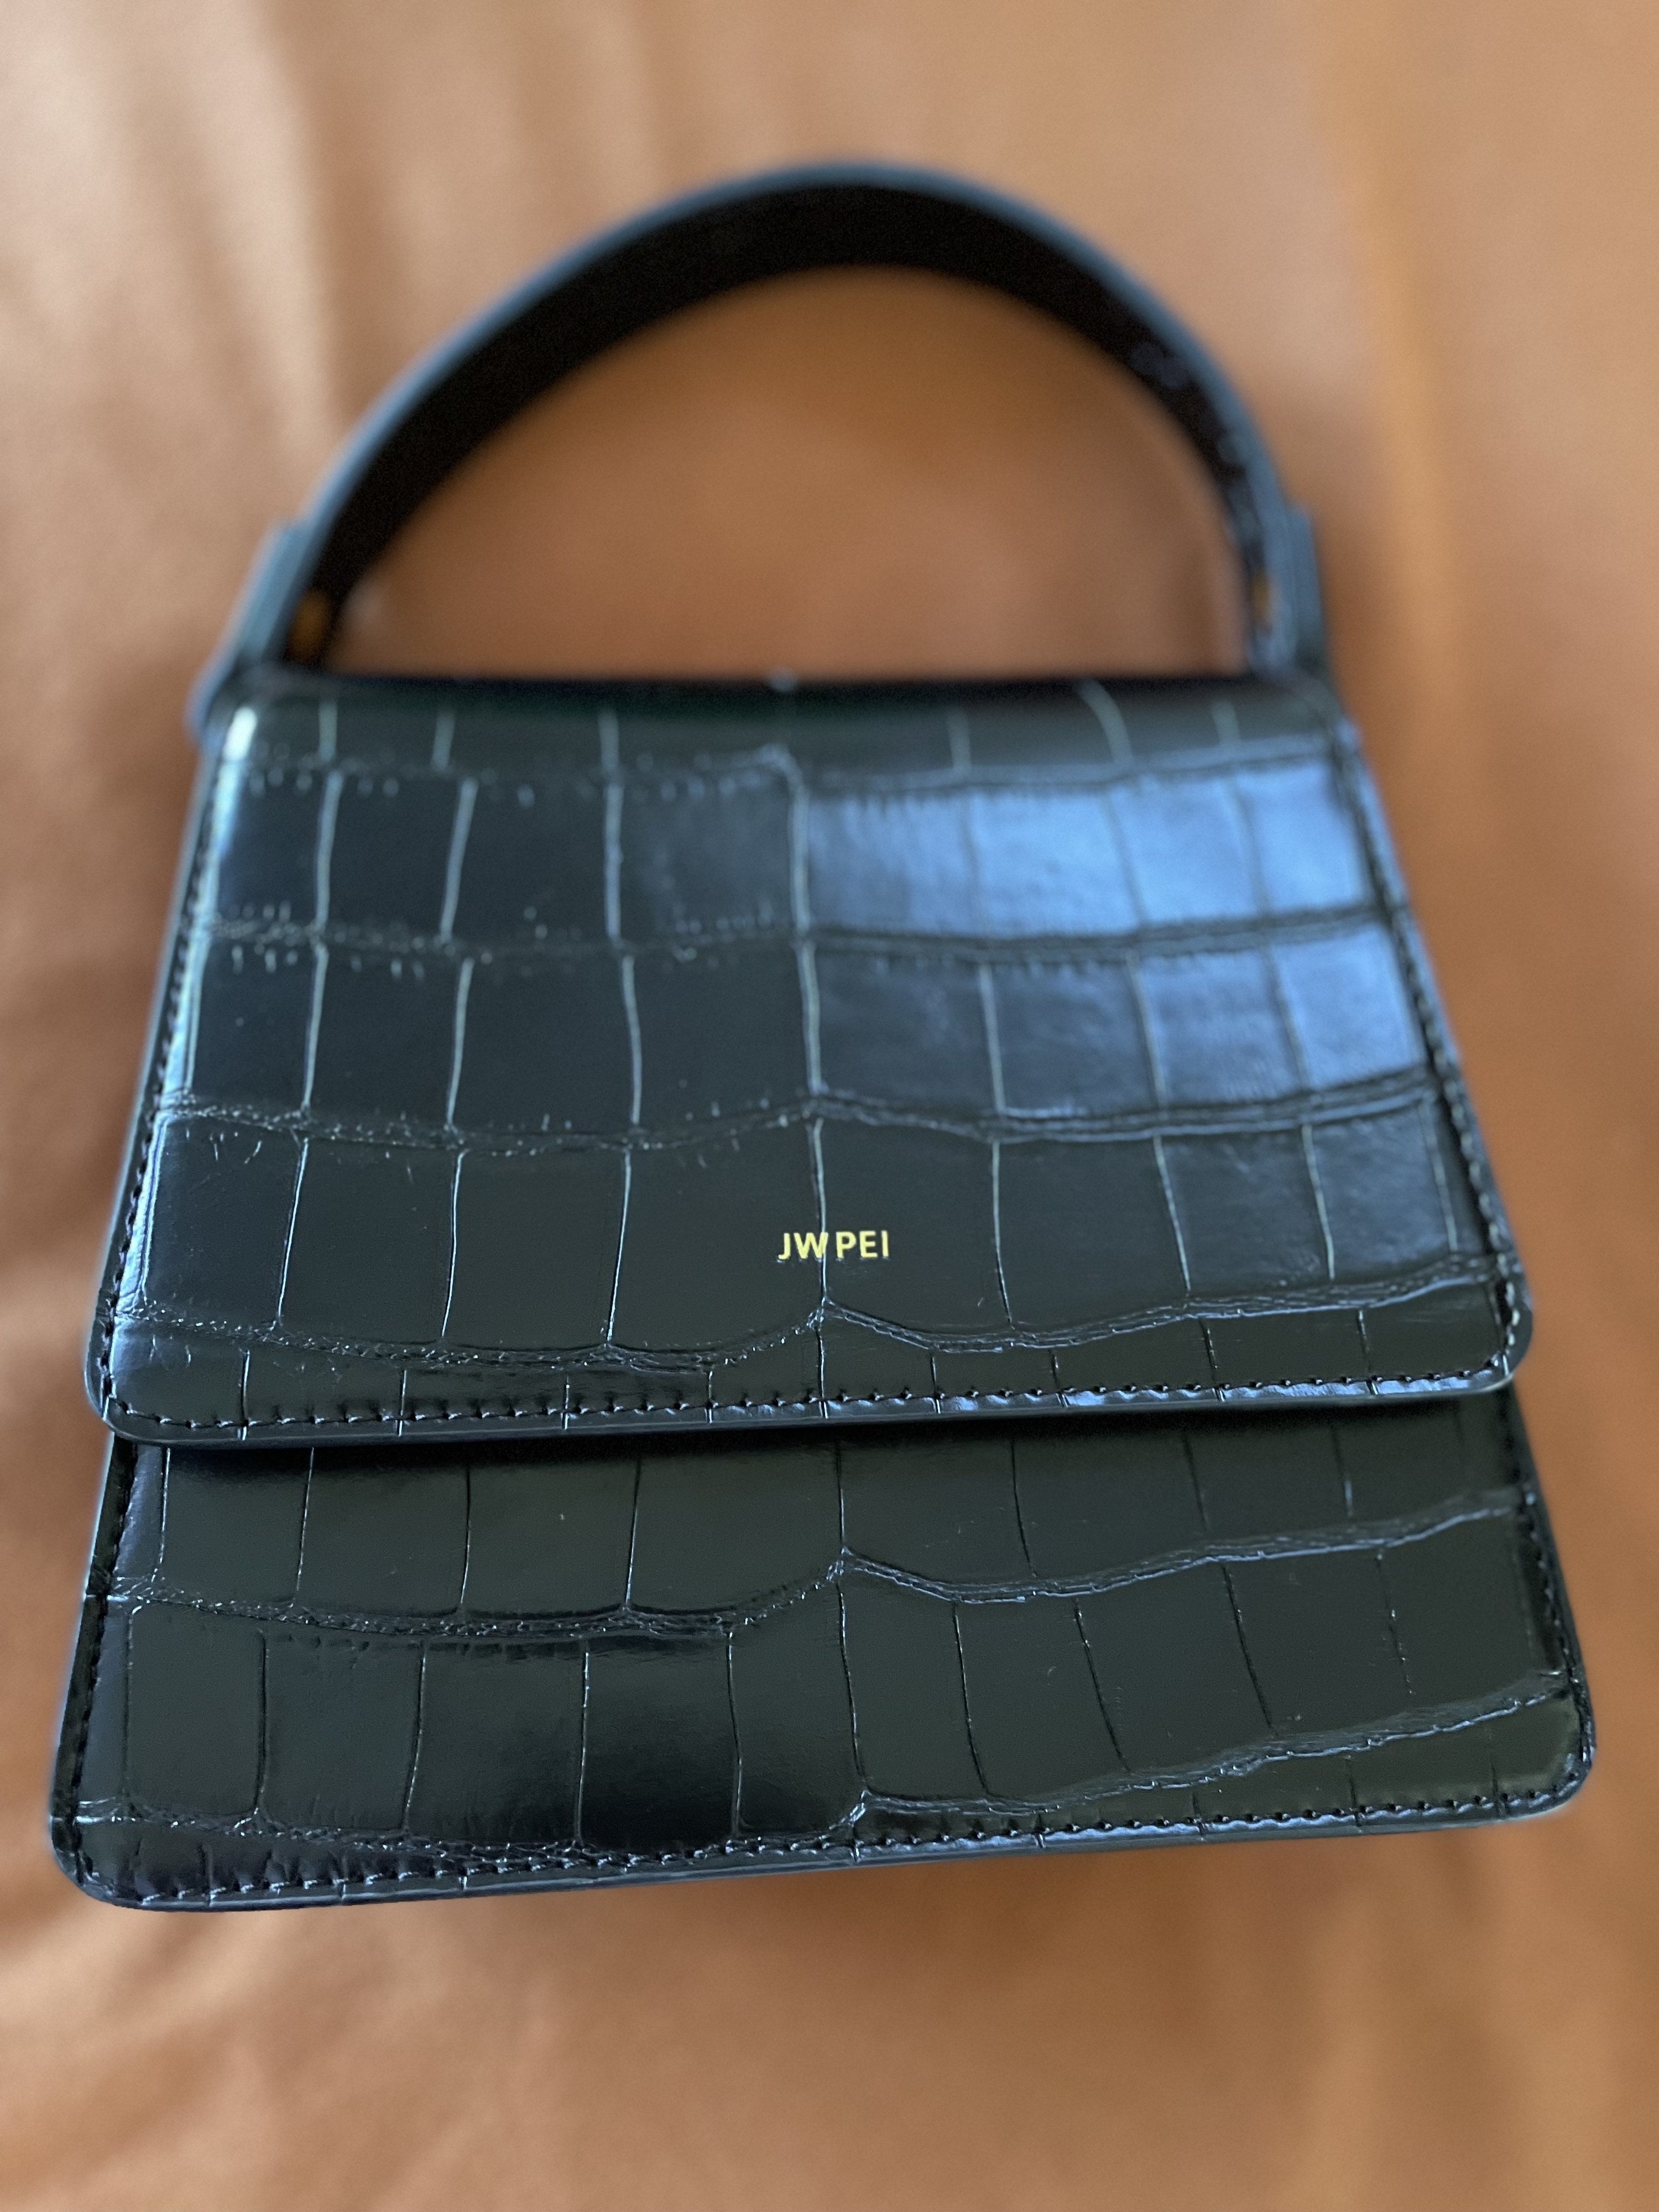 JW PEI: Gabbi Bag Review // Vegan leather //AFFORDABLE //SUSTAINABLE BRAND  